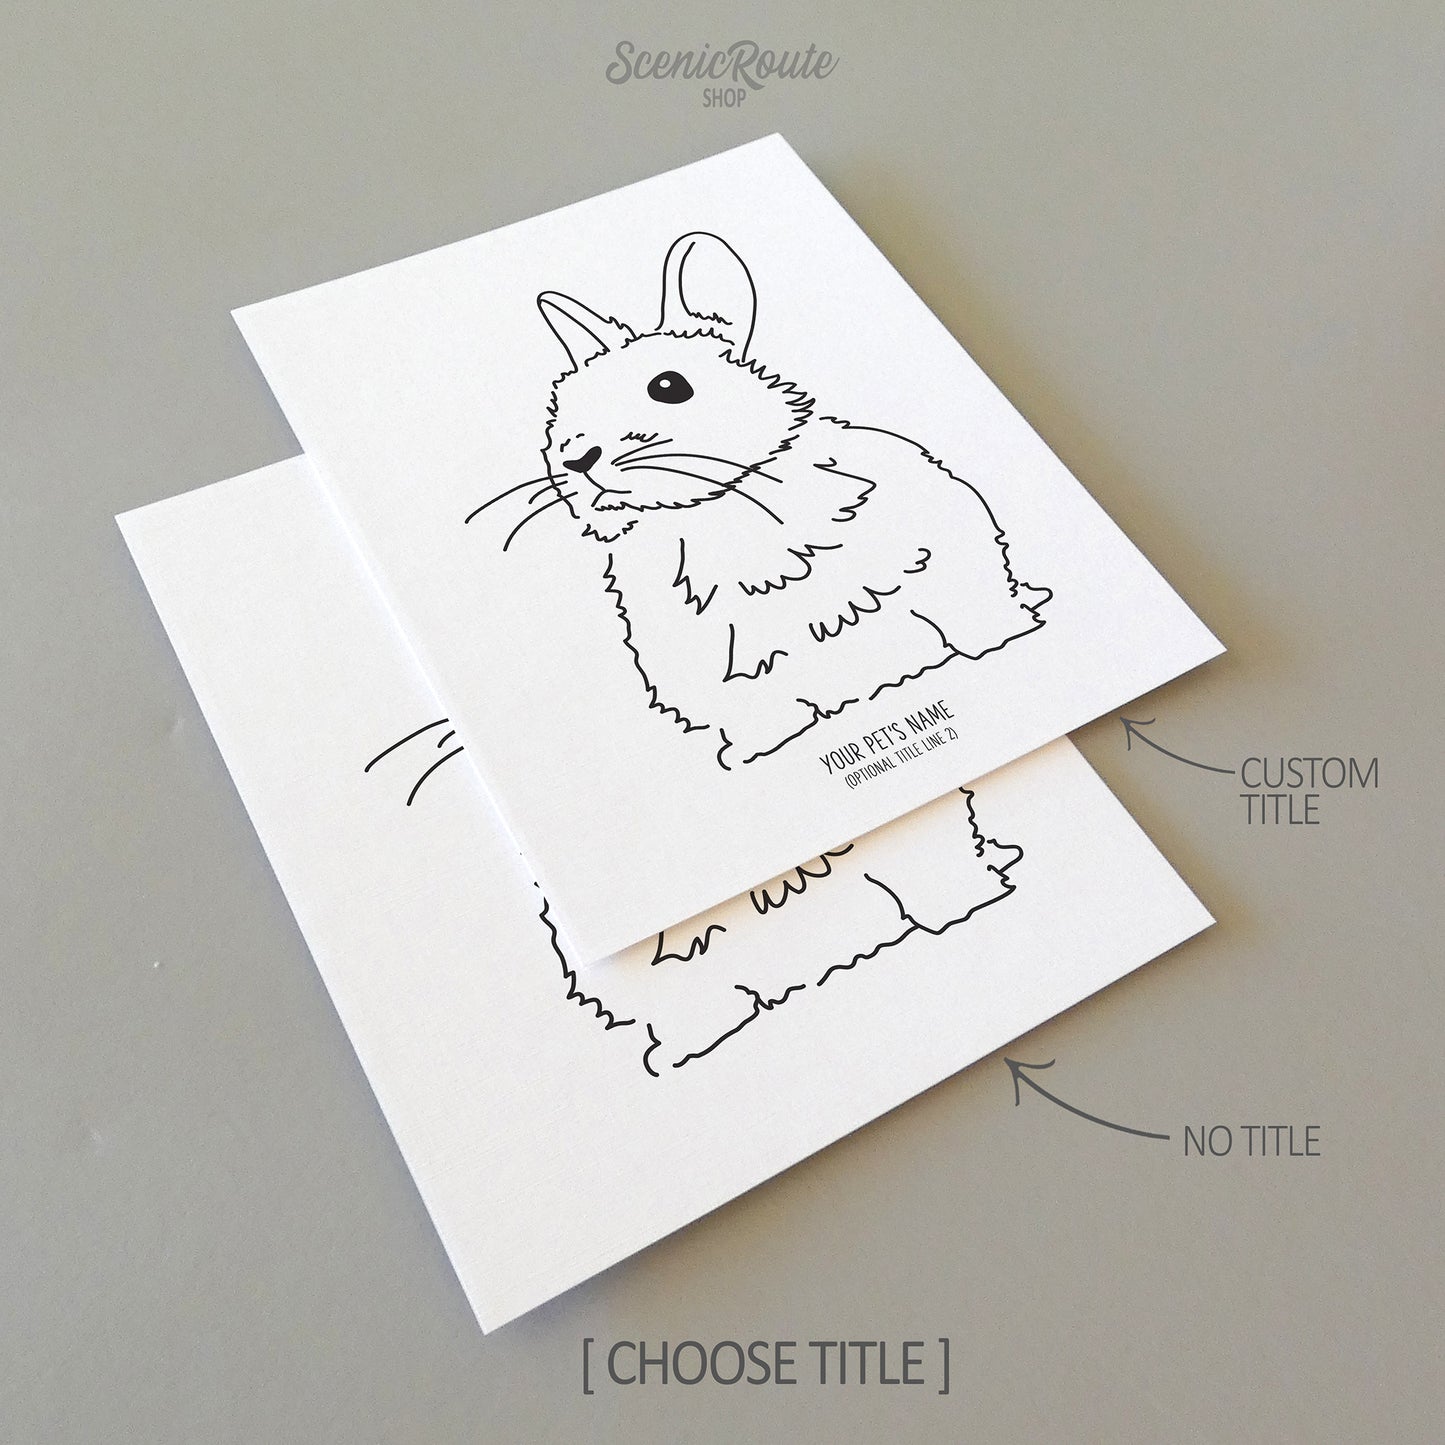 Two line art drawings of a Netherland Dwarf Rabbit on white linen paper with a gray background.  The pieces are shown with “No Title” and “Custom Title” options for the available art print options.